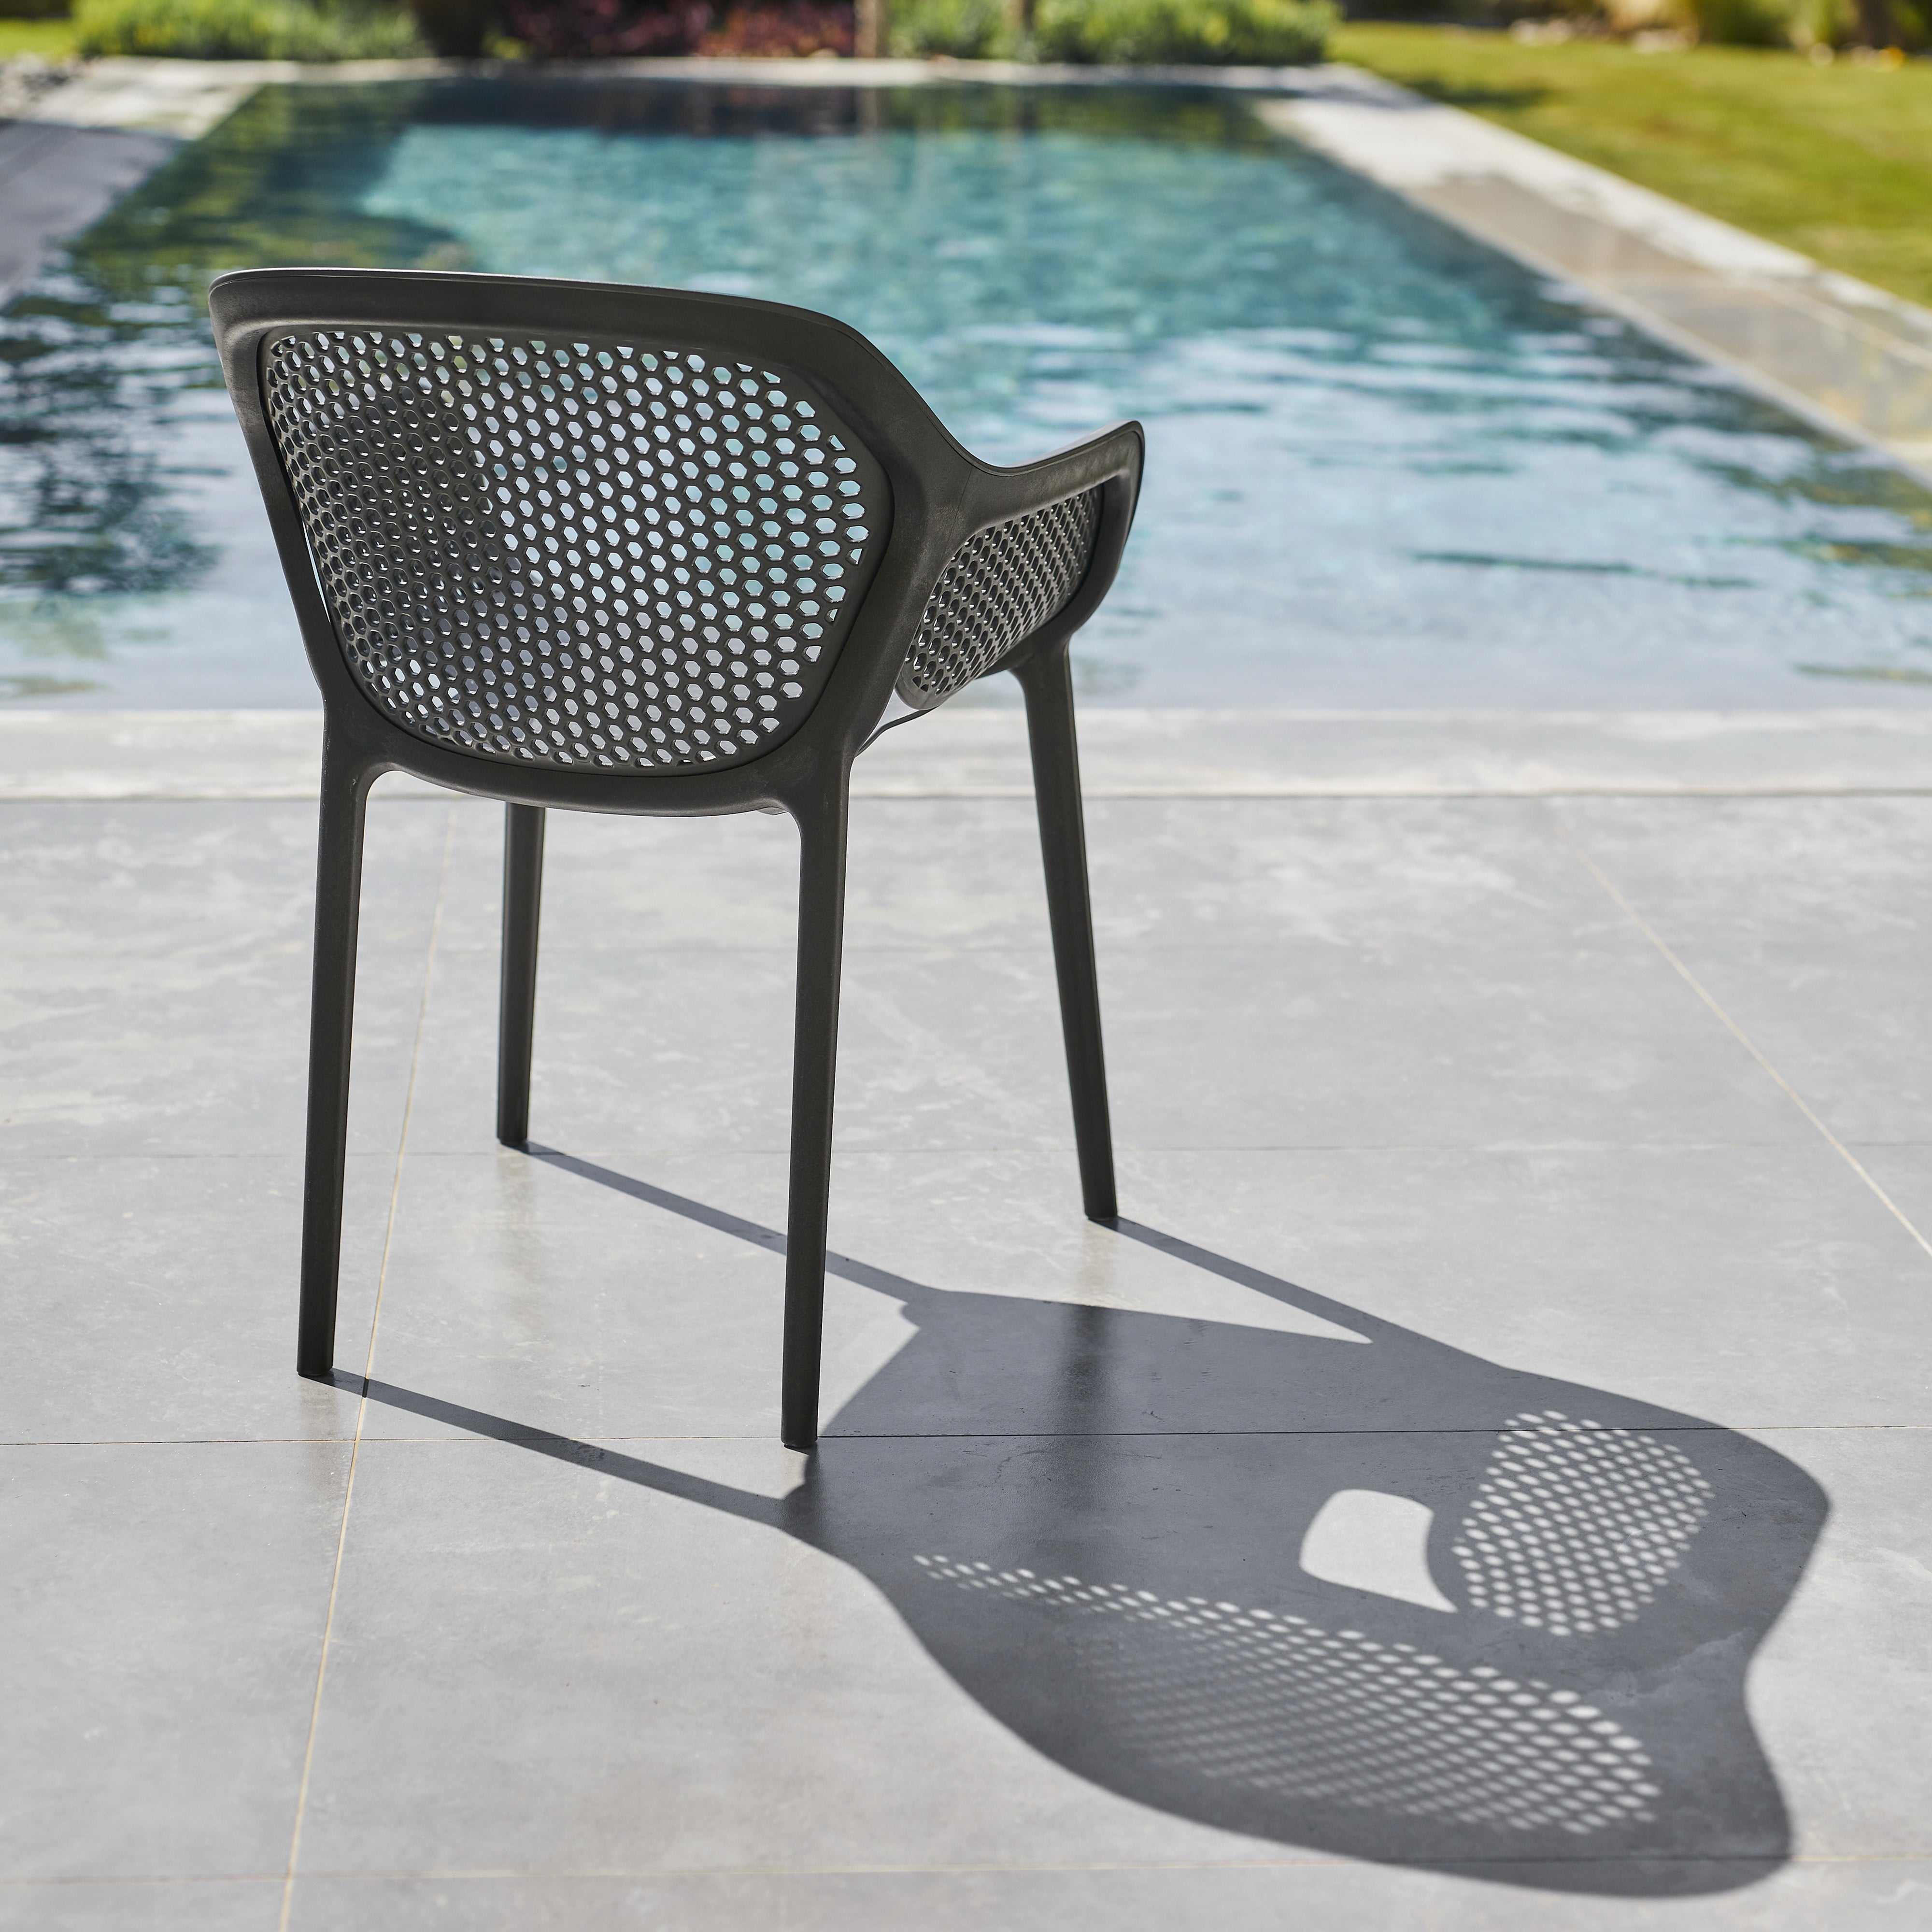 Atra Patio Dining Chair in Anthracite - (Set of 2)